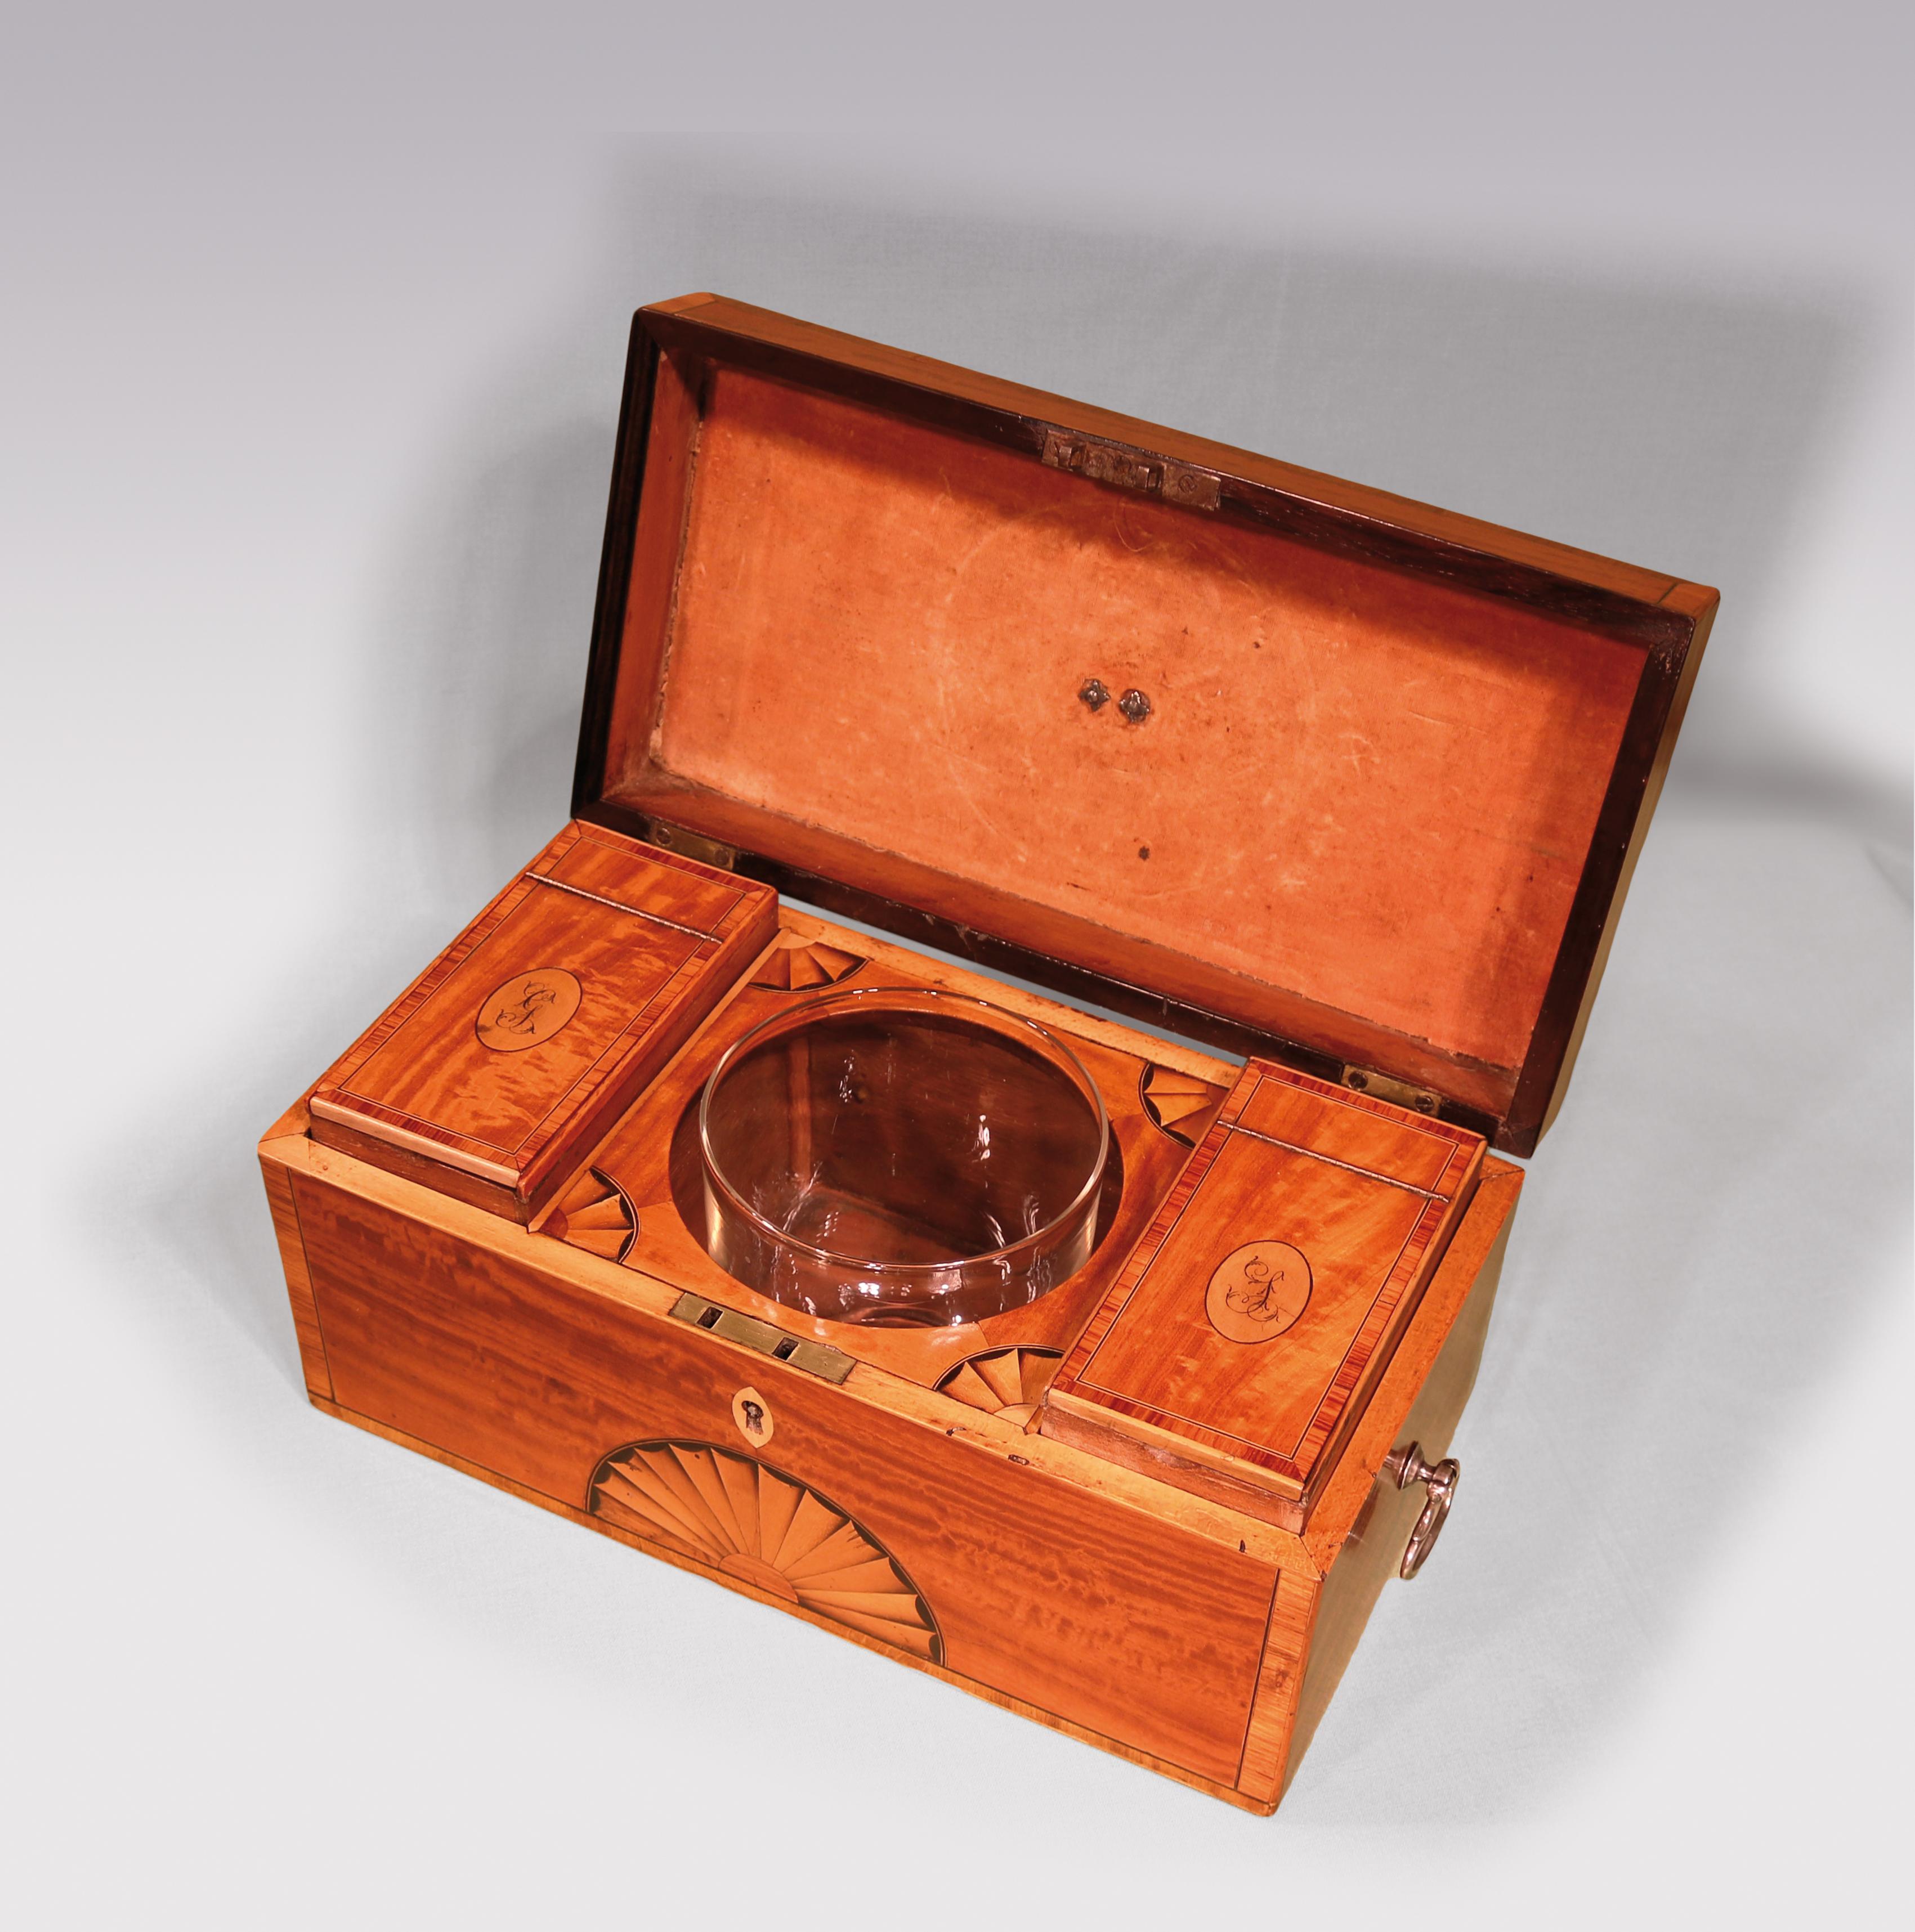 A late 18th century Sheraton period tulipwood crossbanded satinwood Teacaddy, having oval fan inlays & silver handles. The interior fitted with compartments with initialled lids & central mixing bowl compartment.